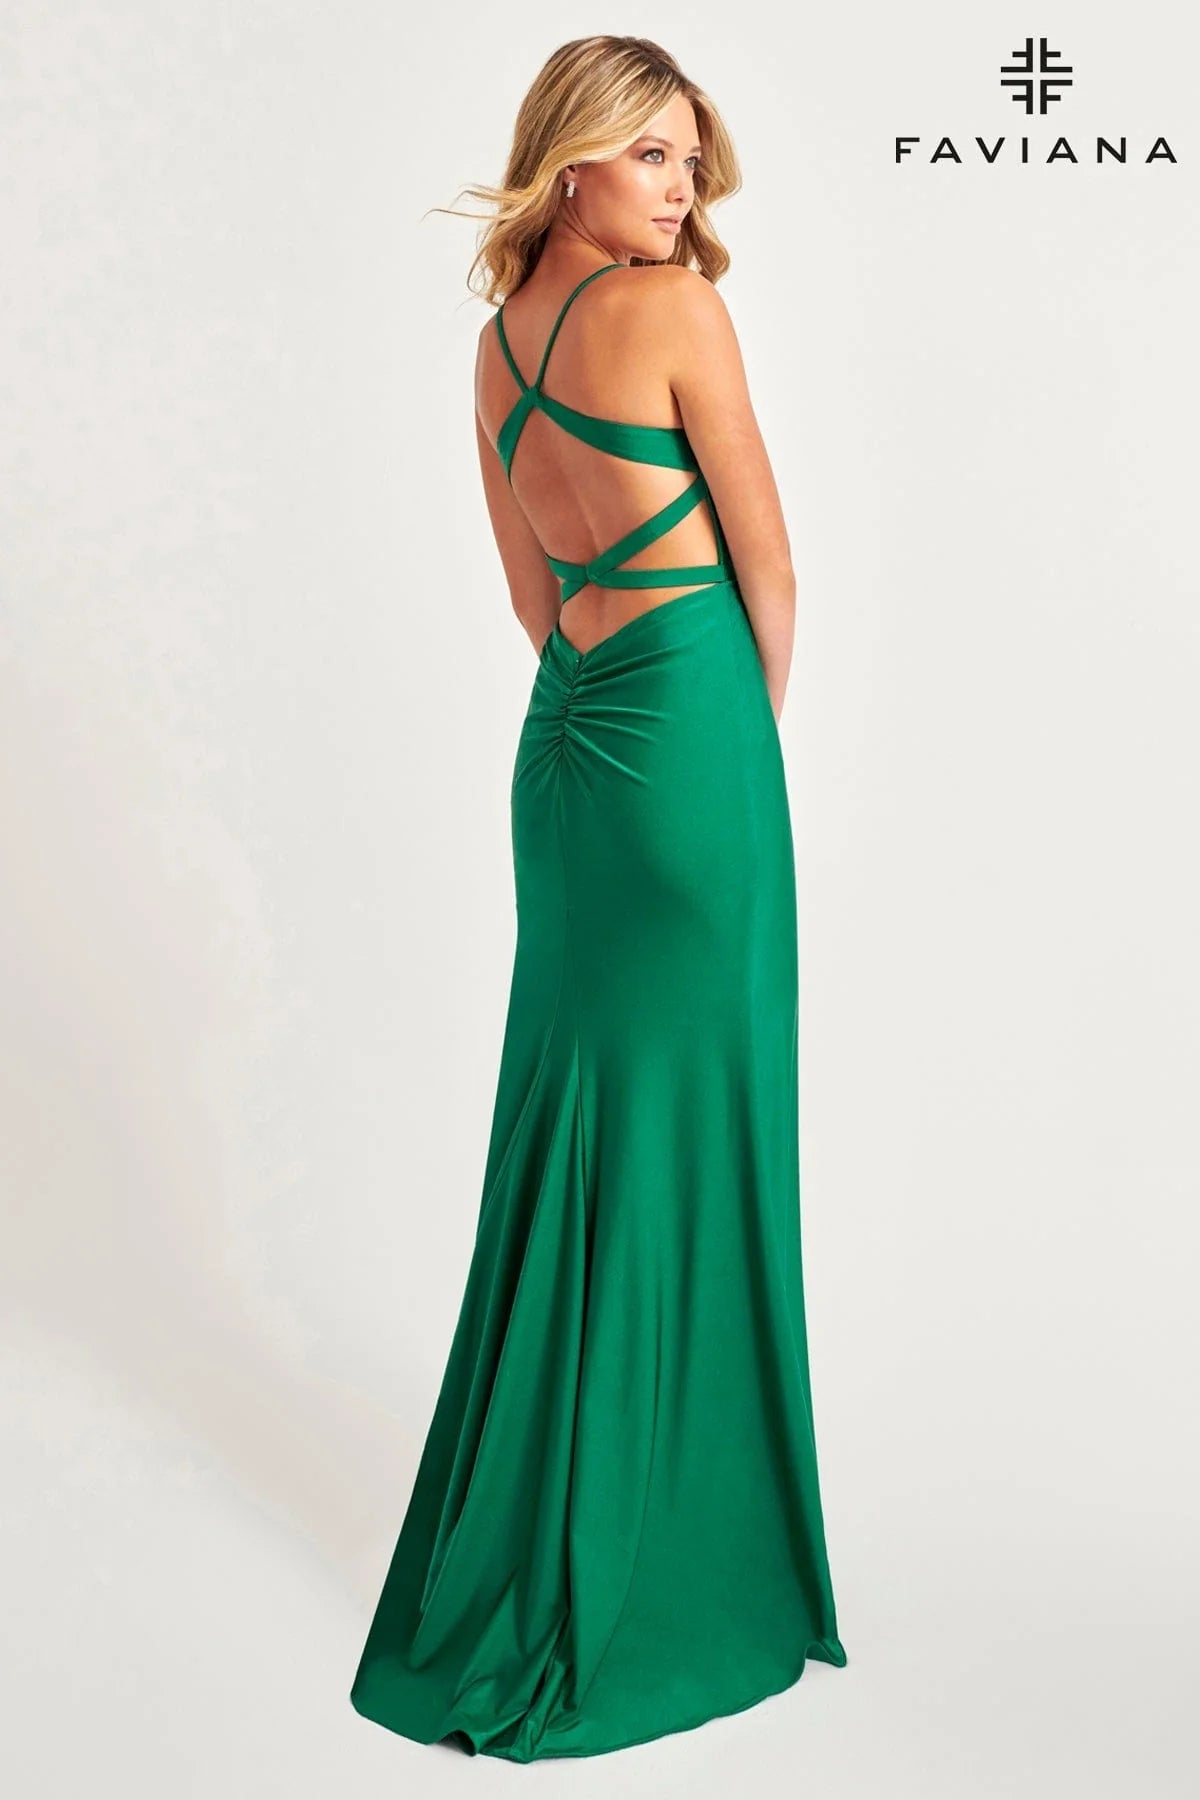 Dark Emerald Strappy Back Detail Formal Dress With Scoop Neck And Ruching